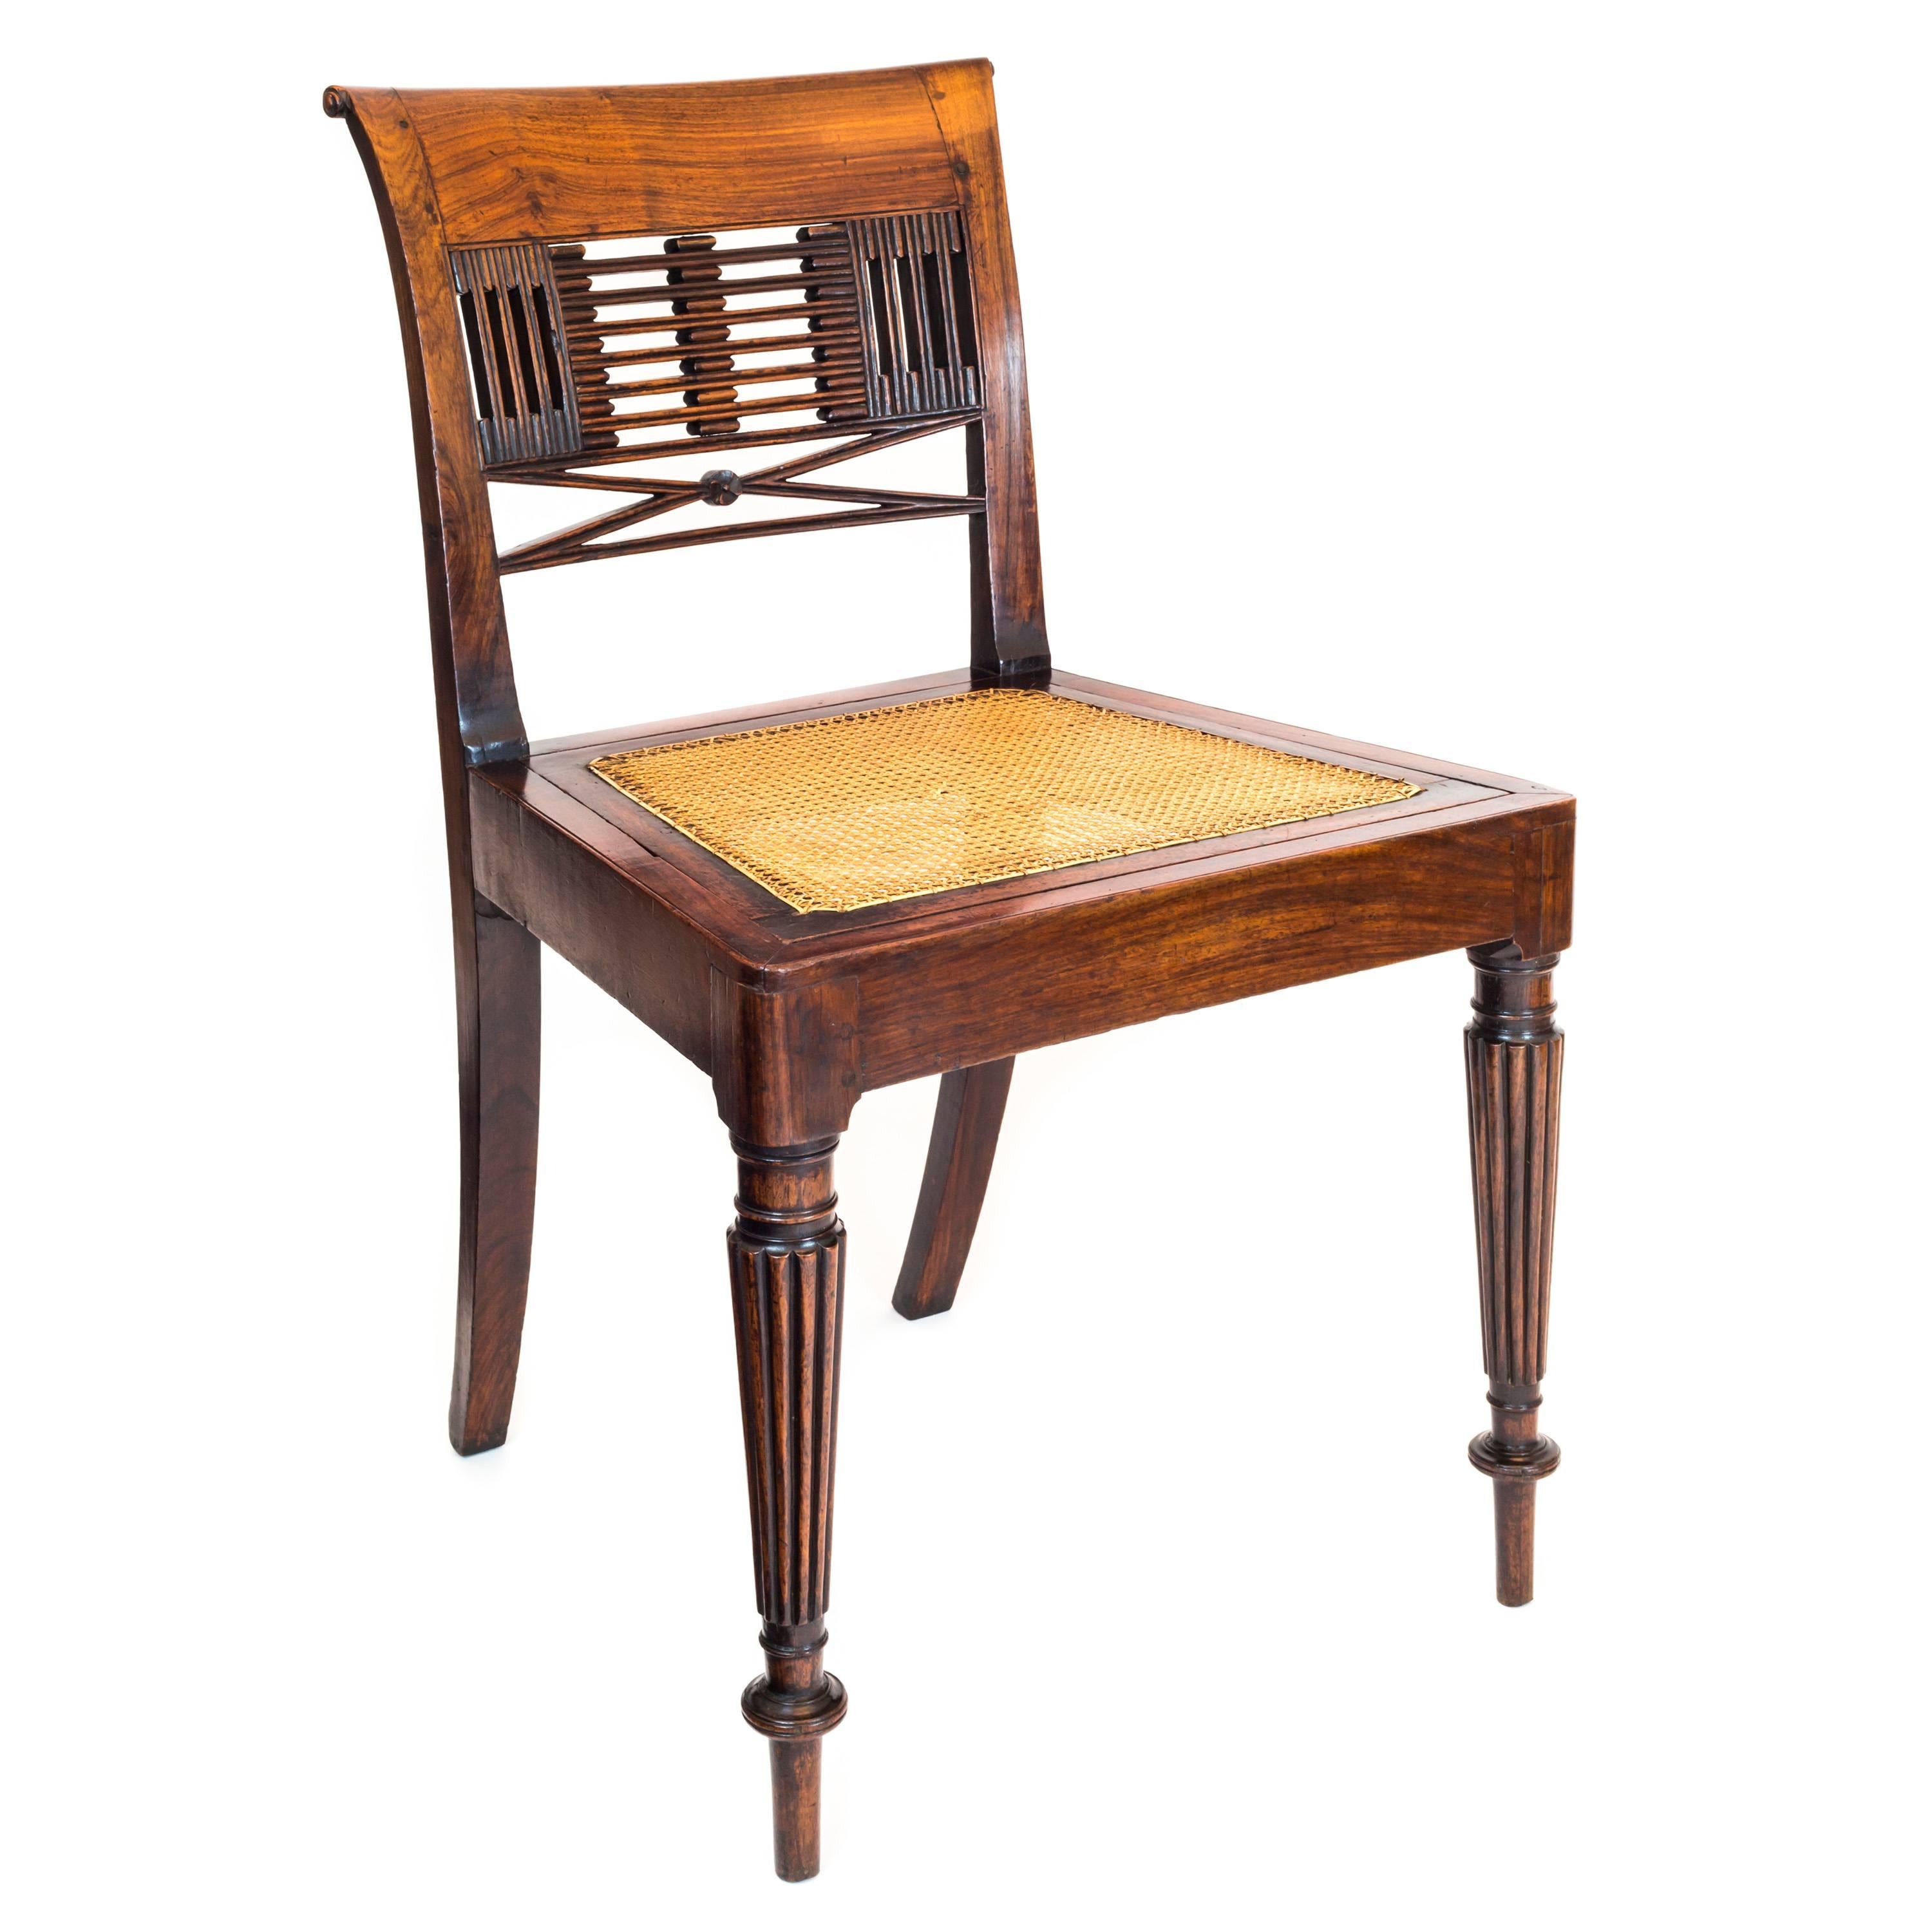 A rare Regency period colonial side chair in solid padouk, made for English market,

Anglo-Chinese, circa 1825.

Having a curved and scrolled top rail, the pirced and carved back splat, above the finely caned drop-in seat, within the solid